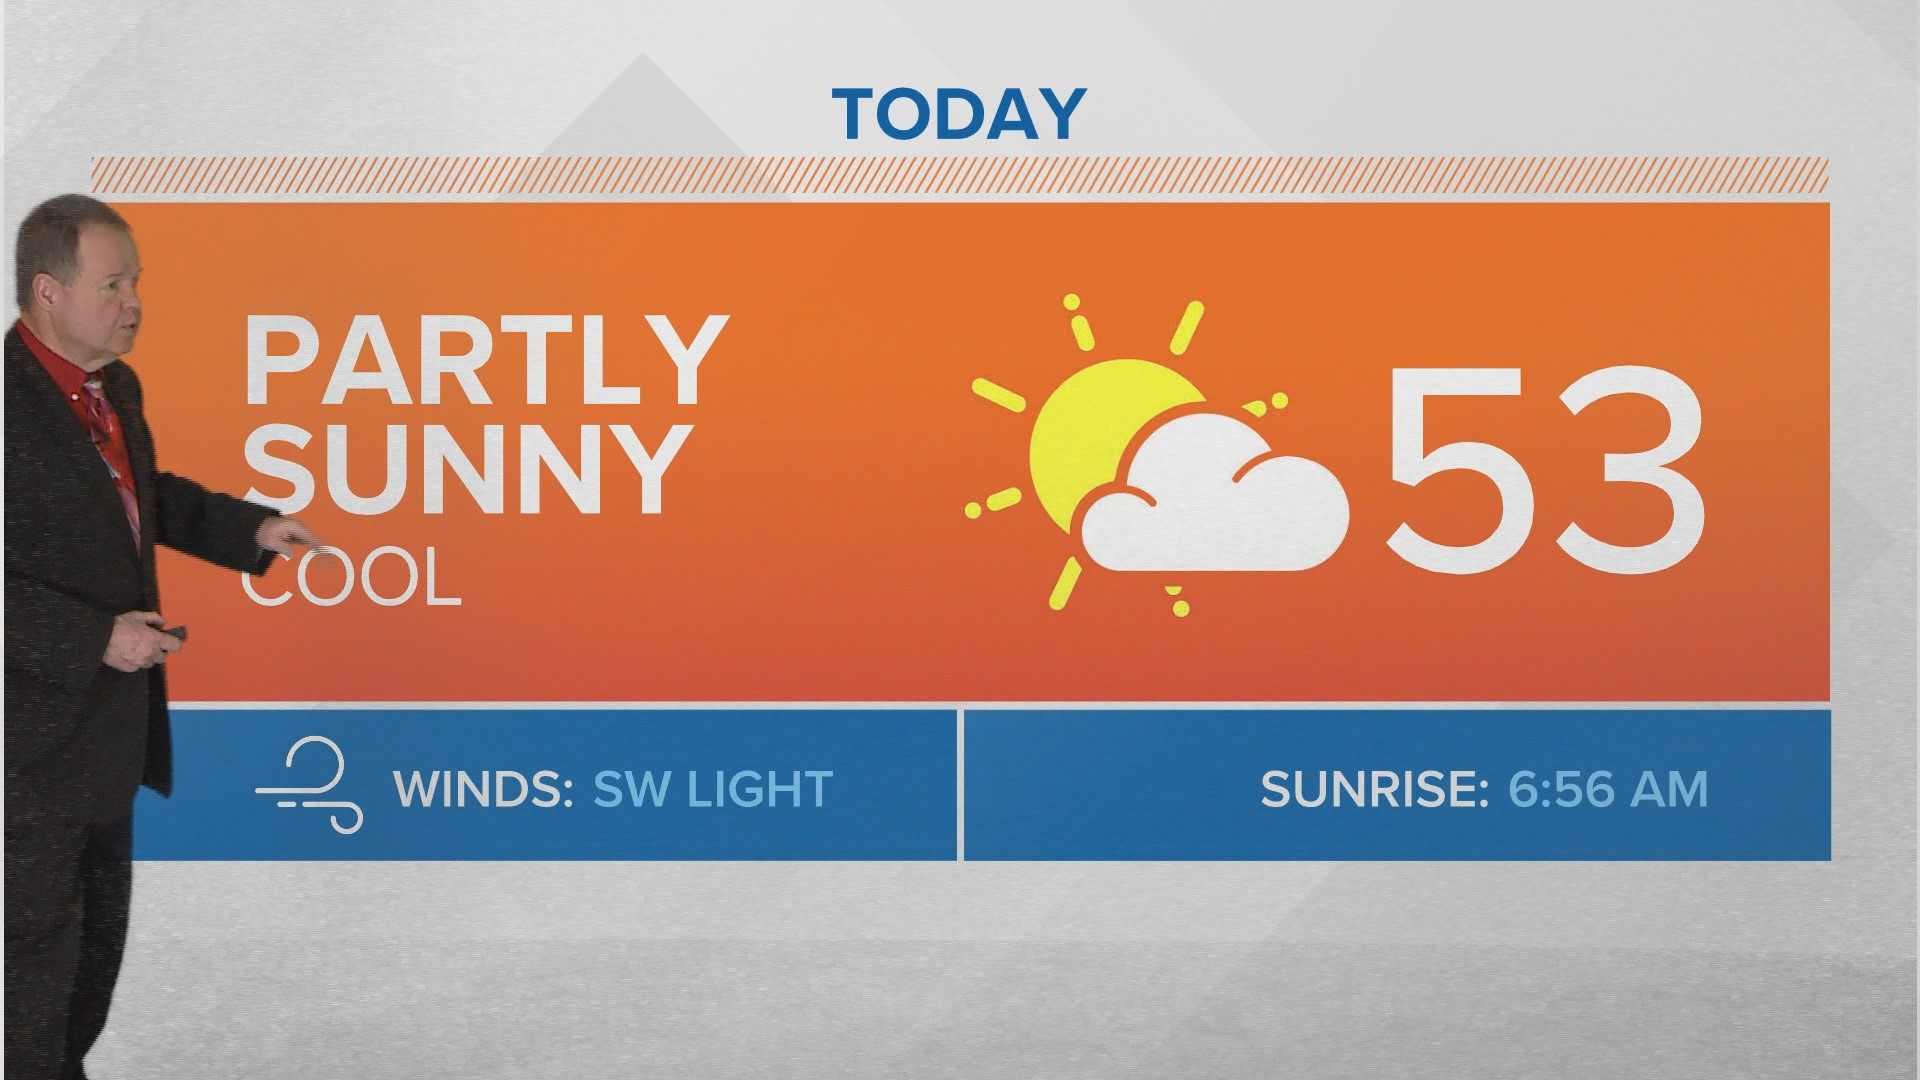 Today: Partly Sunny & Cool. High 53.
Tonight: Partly Cloudy. Low 39.
Monday: Partly Sunny. Warmer. High 67.
Tuesday: Partly Cloudy. Small Shower Chance. High 64.